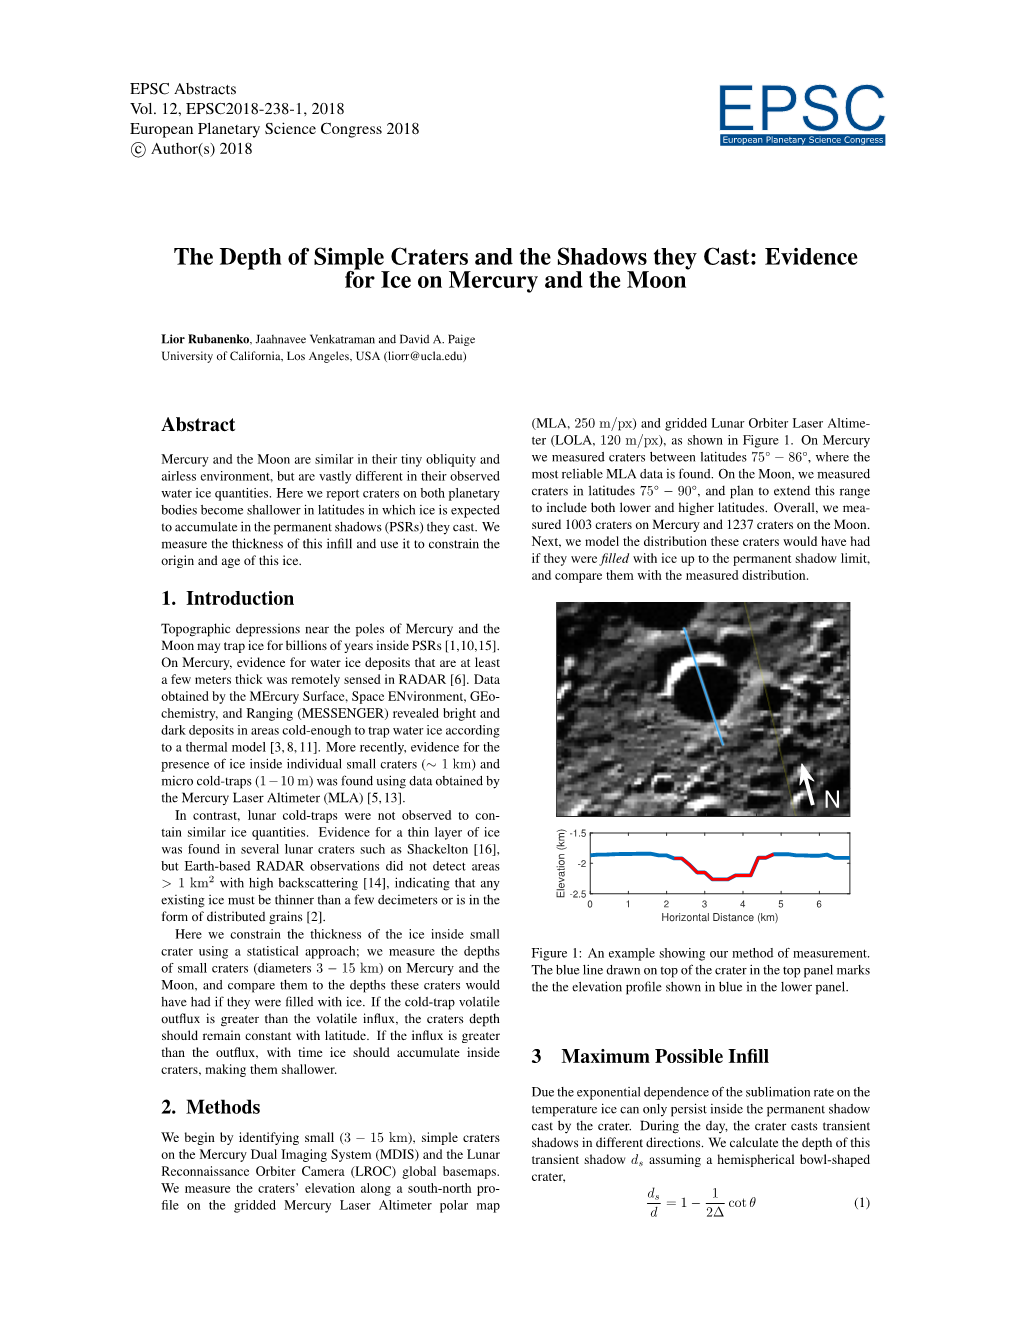 The Depth of Simple Craters and the Shadows They Cast: Evidence for Ice on Mercury and the Moon